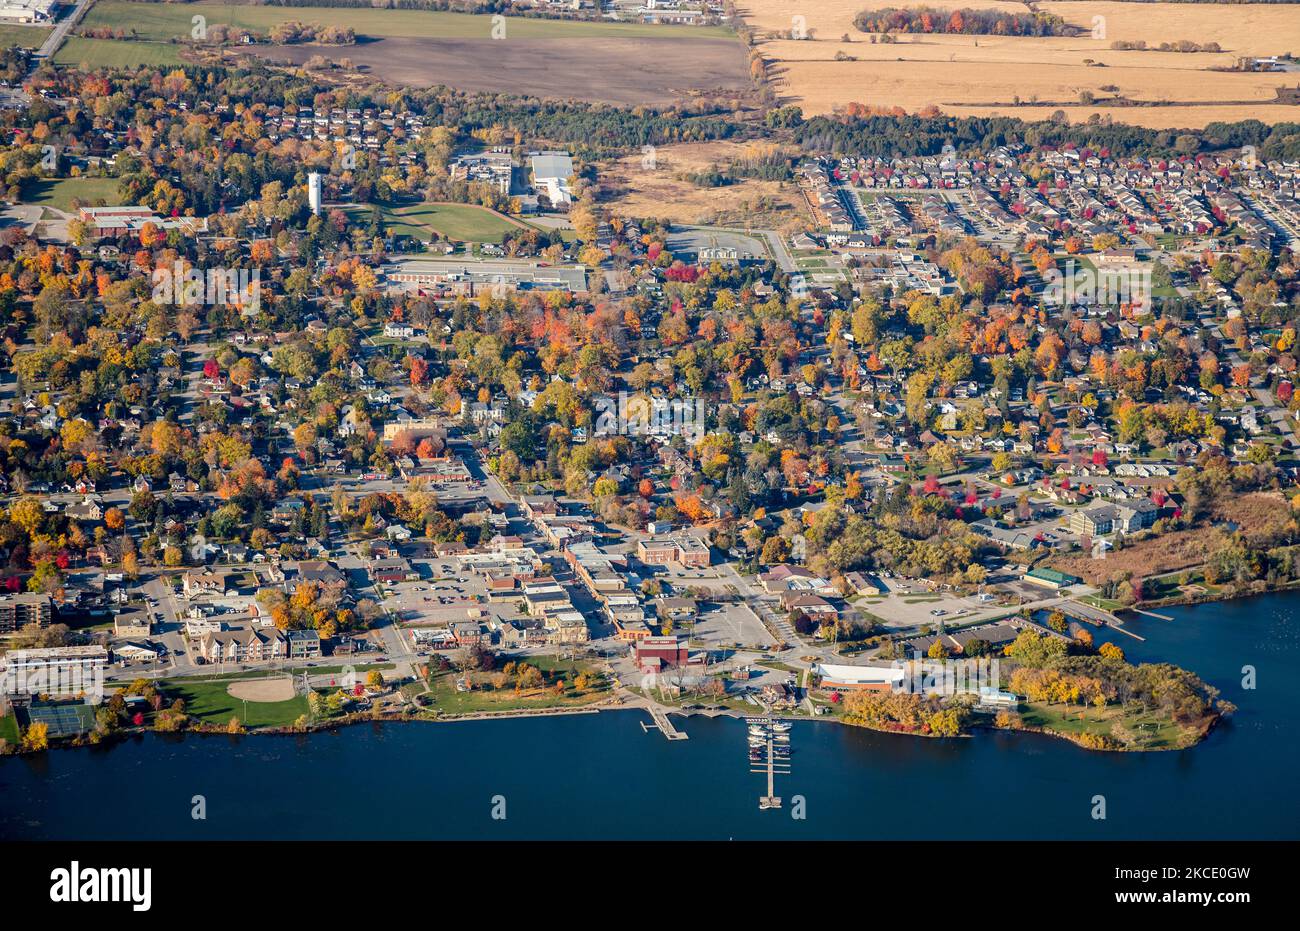 An Aerial stock image of the town of Port Perry on Lake Scugog, Ontario destination. Stock Photo